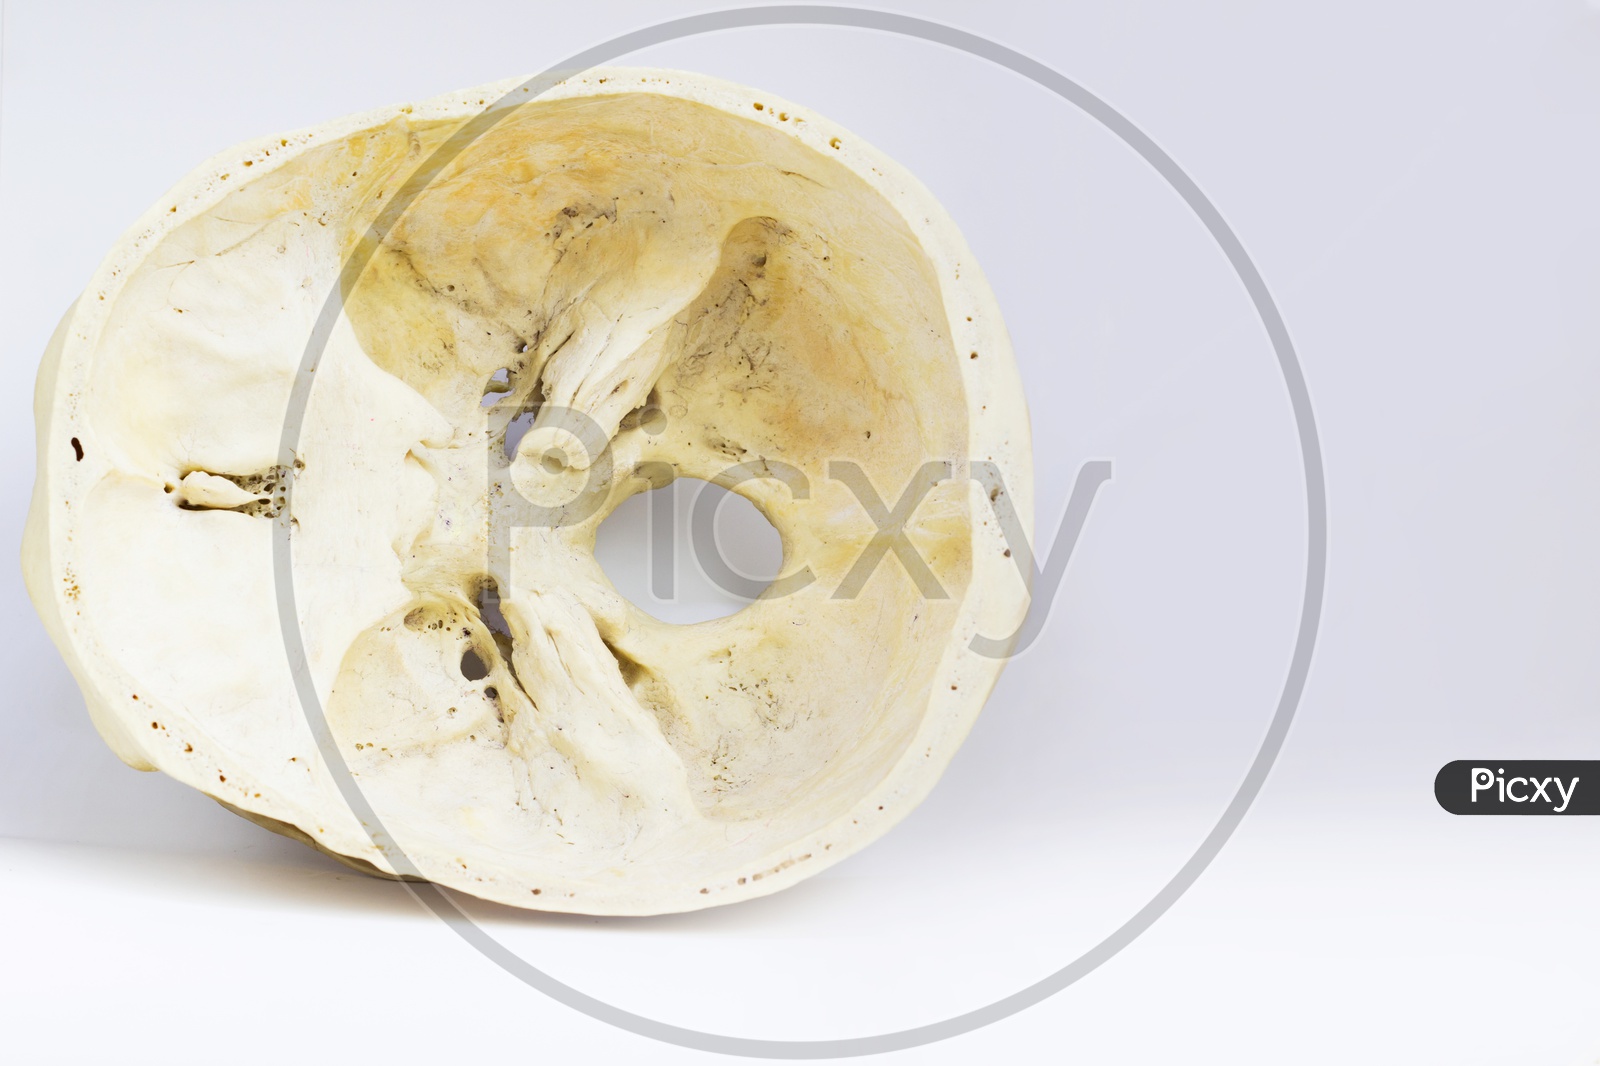 Top View Of Base Of The Human Skull Showing Sphenoid Bone And Foramen Magnum For Anatomy In Isolated White Background.